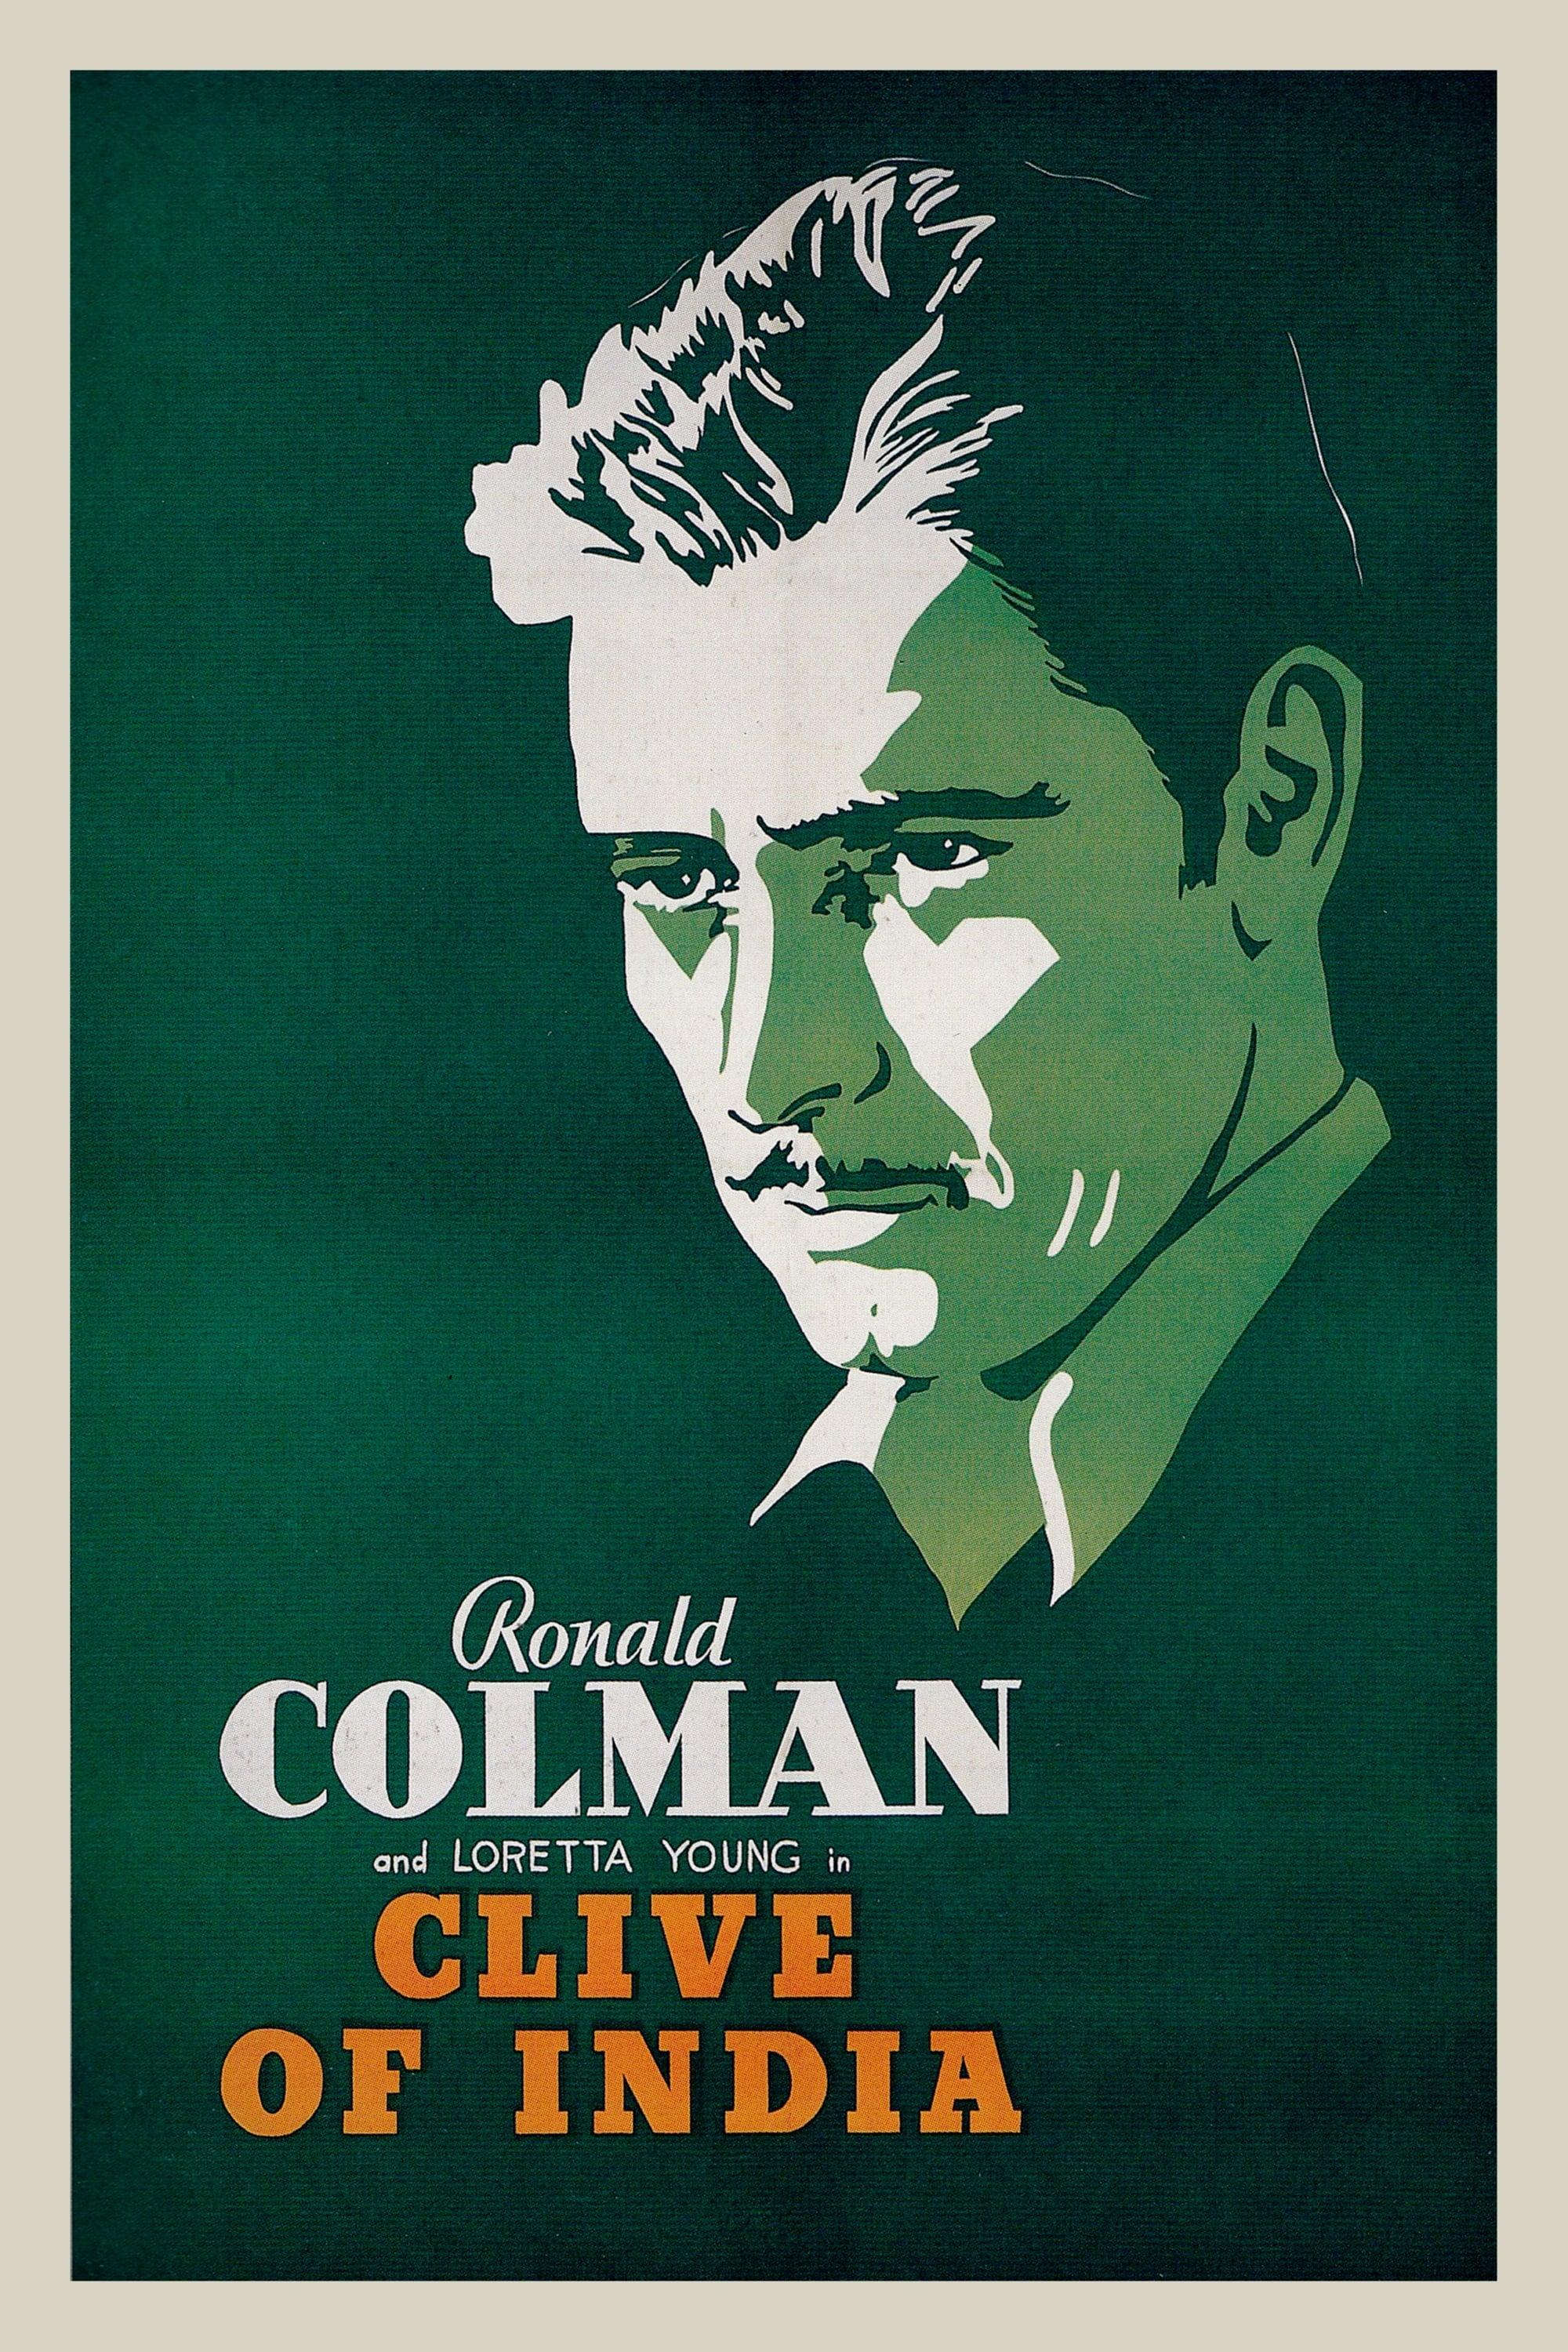 Clive of India poster